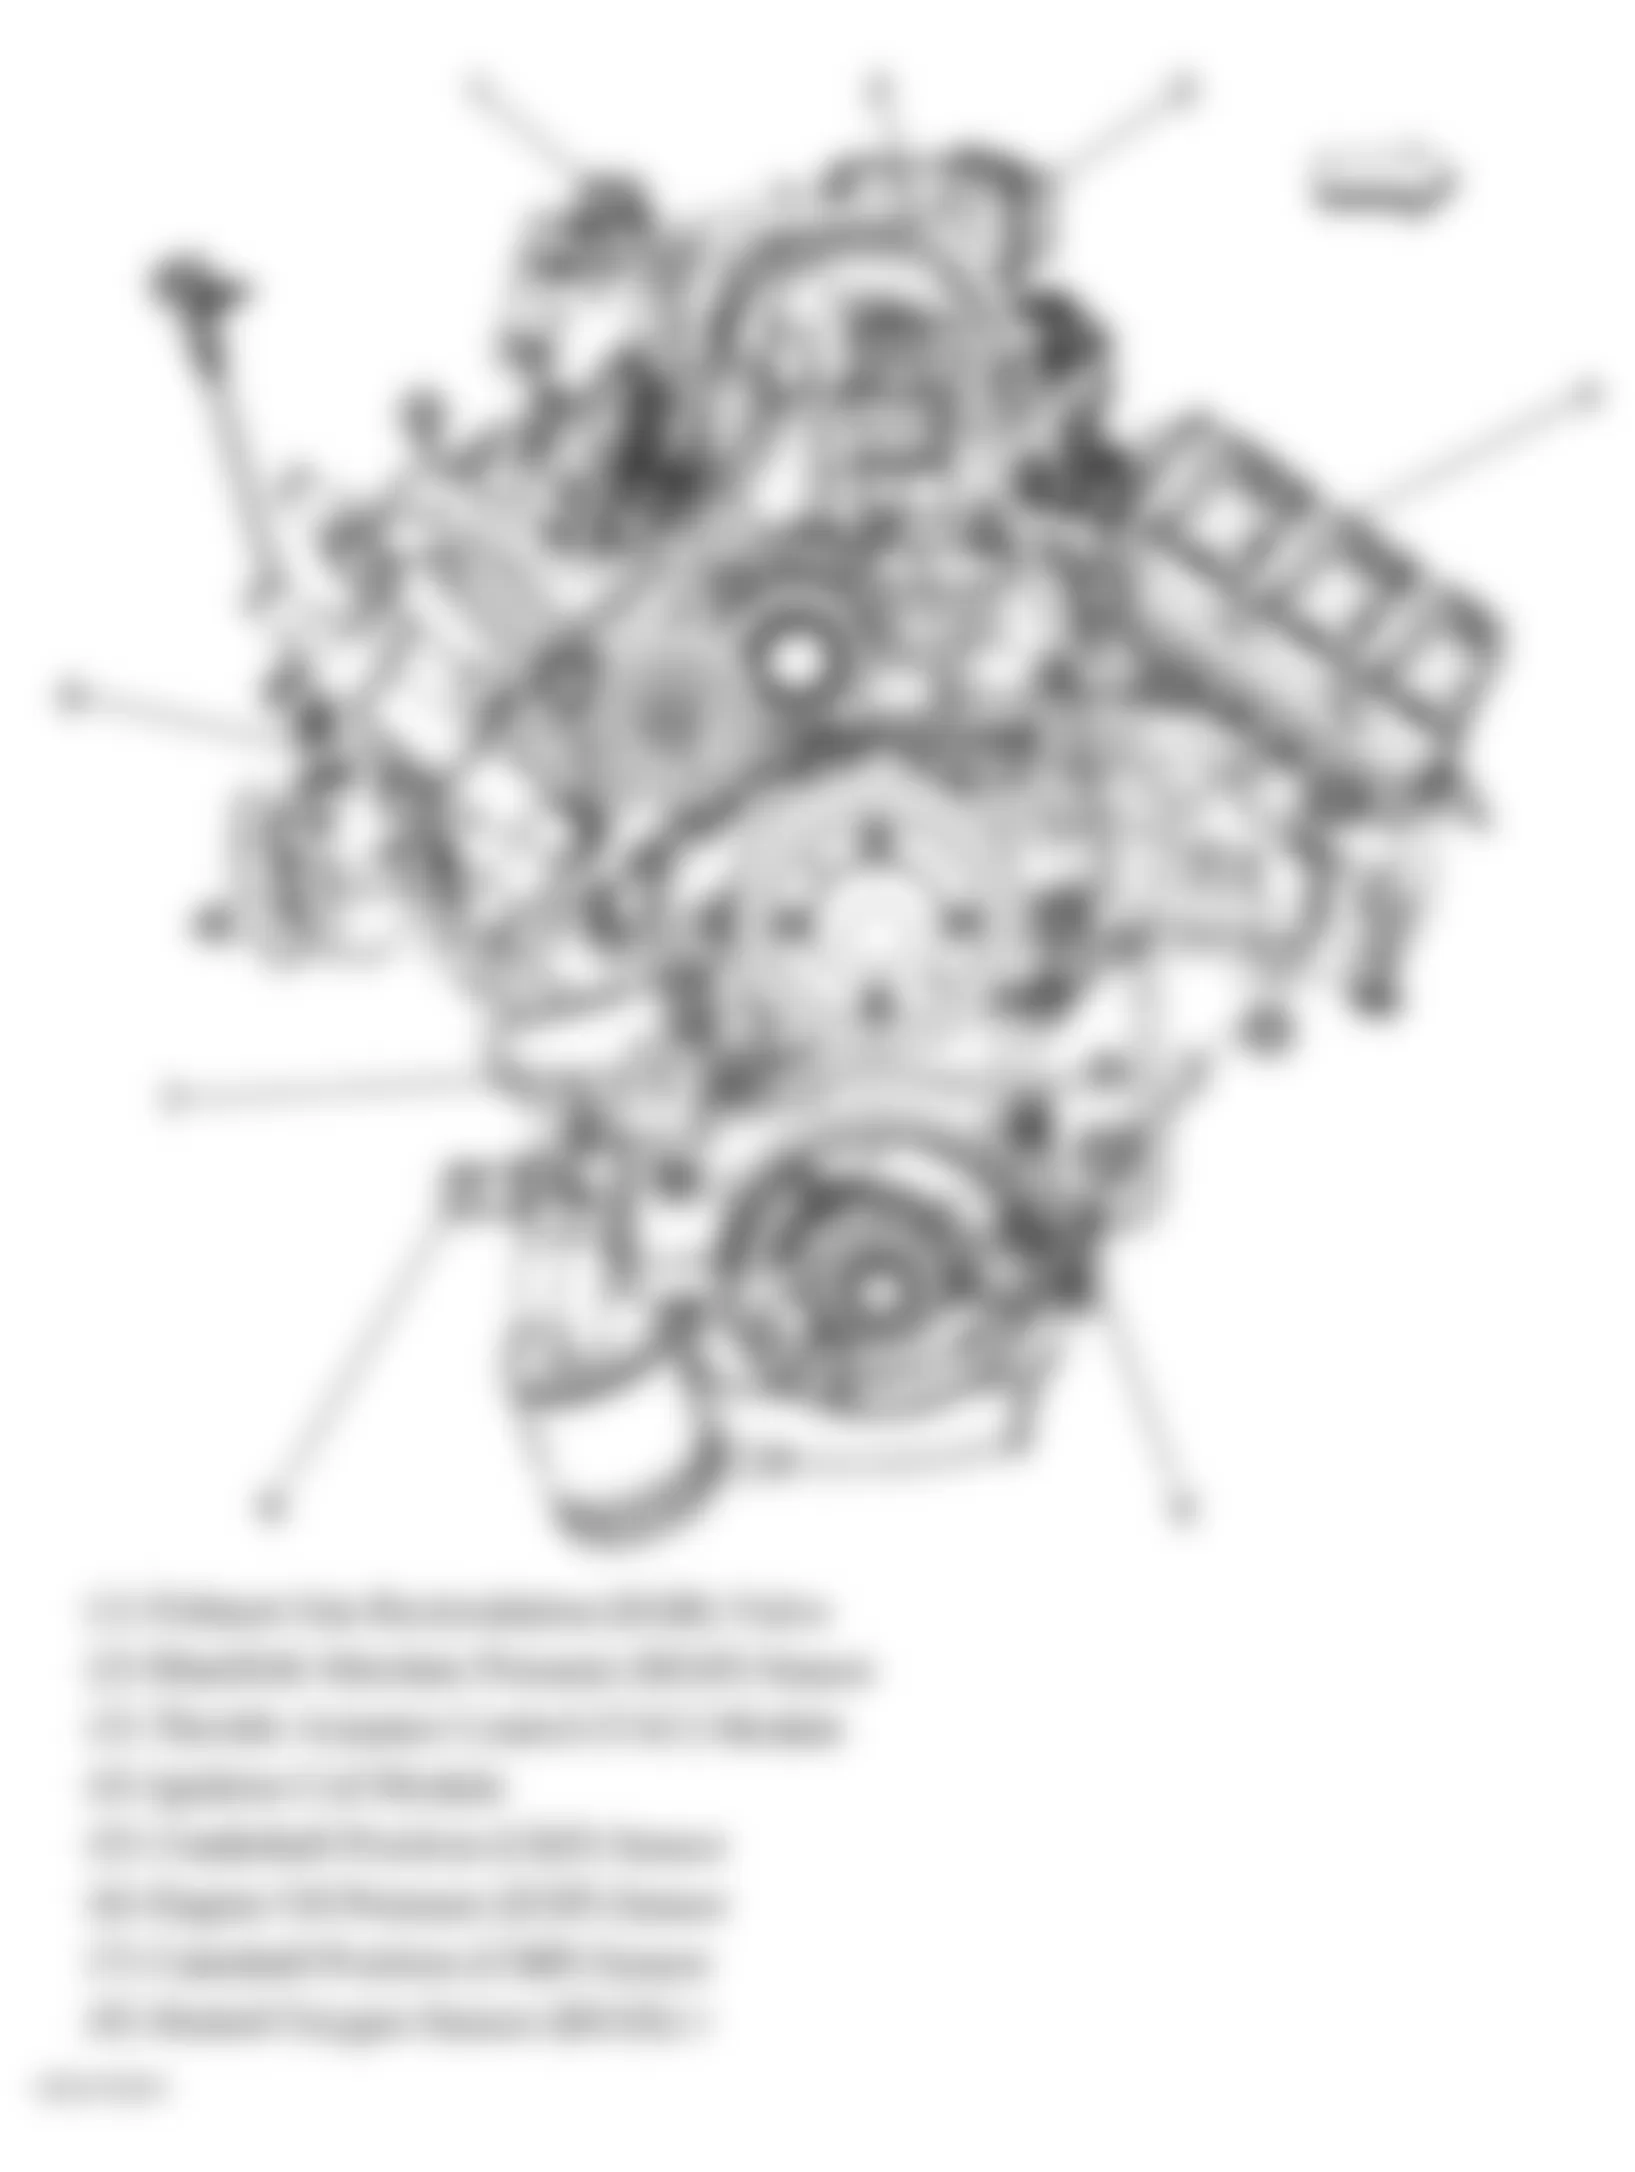 Buick Lucerne Super 2008 - Component Locations -  Front Of Engine (3.8L)